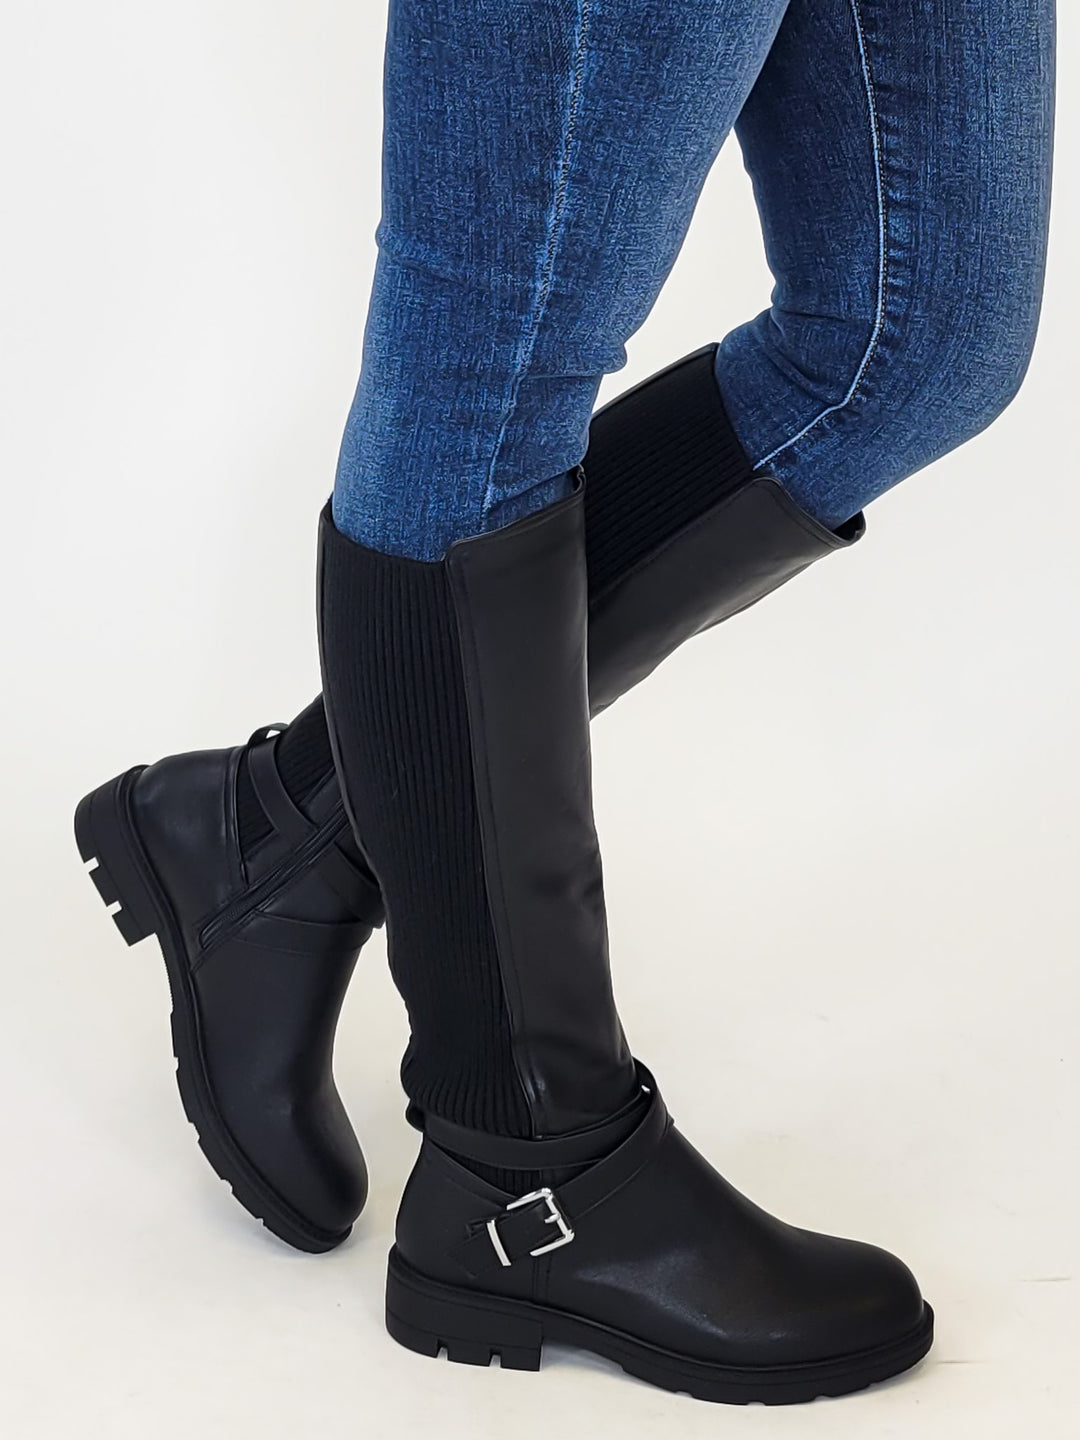 CORKY'S HAYRIDE STRETCHY CALF TALL BOOT - BLACK